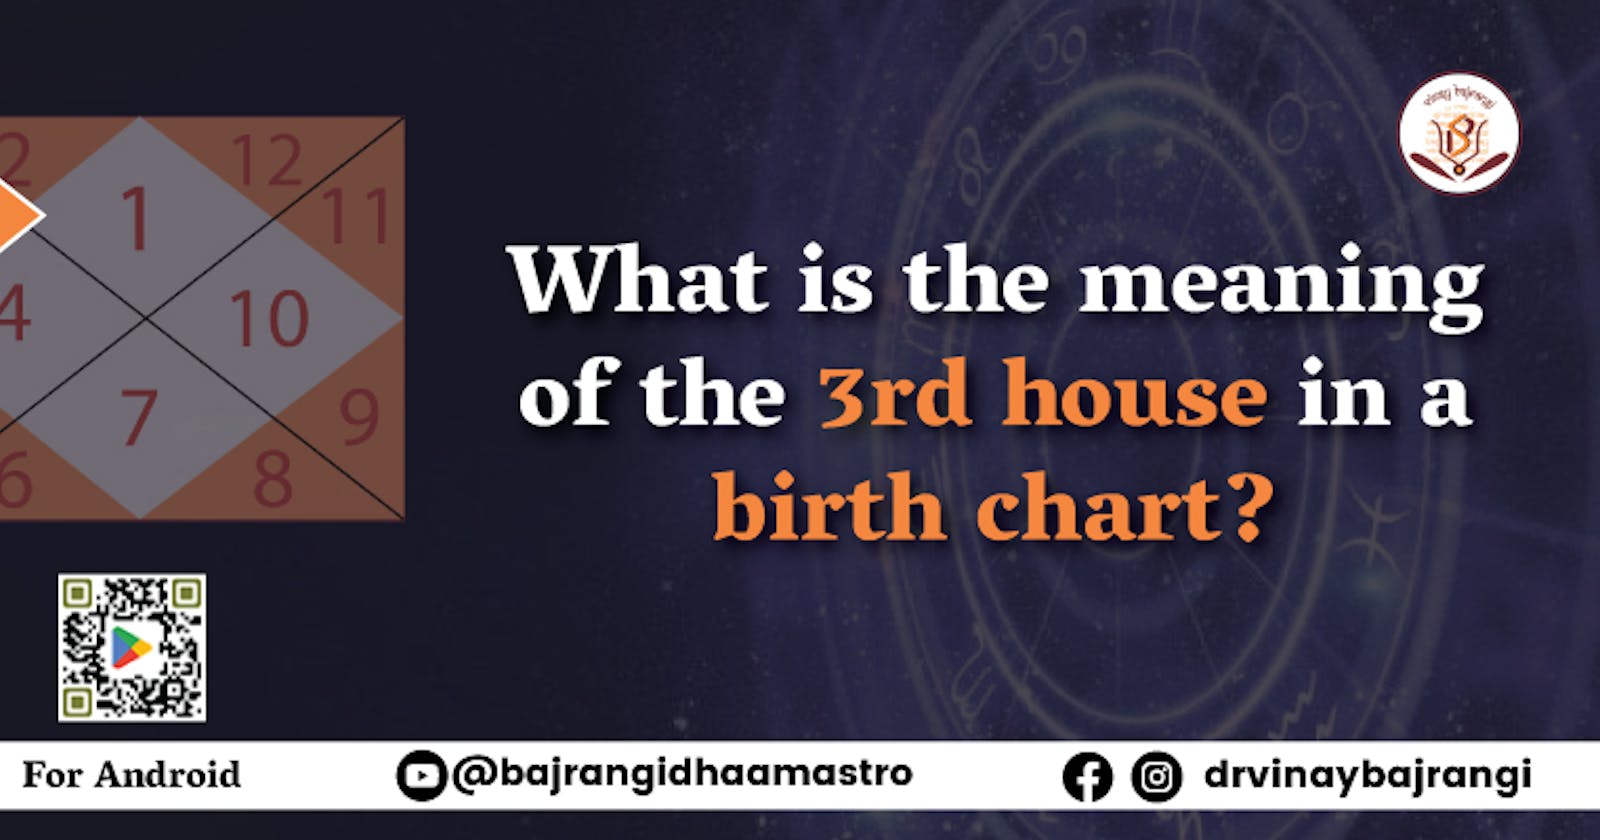 What is the meaning of the 3rd house in a birth chart?